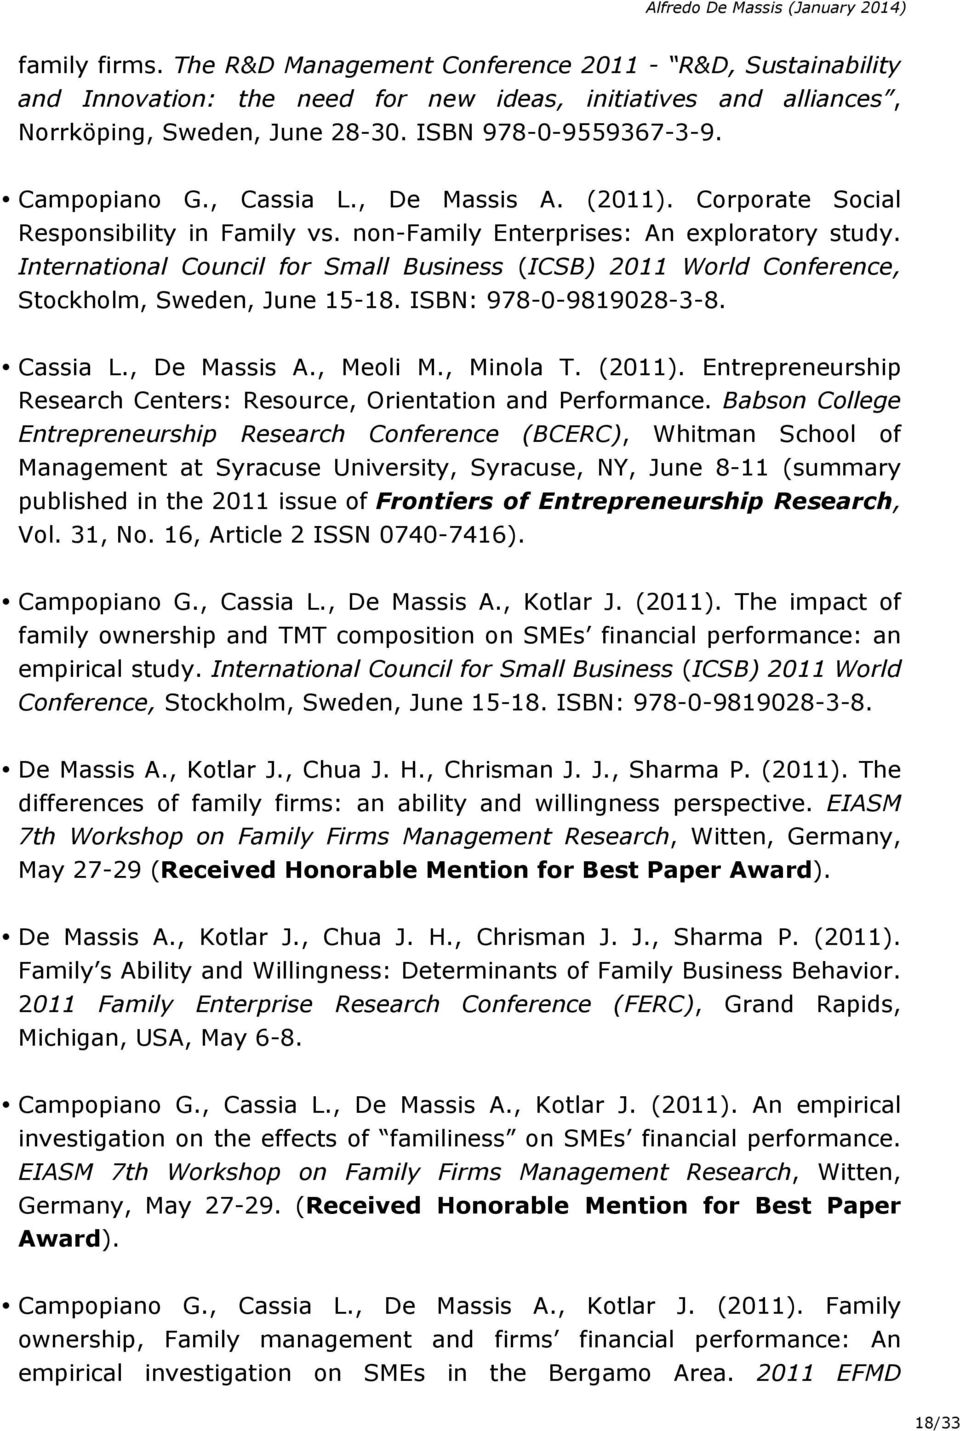 International Council for Small Business (ICSB) 2011 World Conference, Stockholm, Sweden, June 15-18. ISBN: 978-0-9819028-3-8. Cassia L., De Massis A., Meoli M., Minola T. (2011).